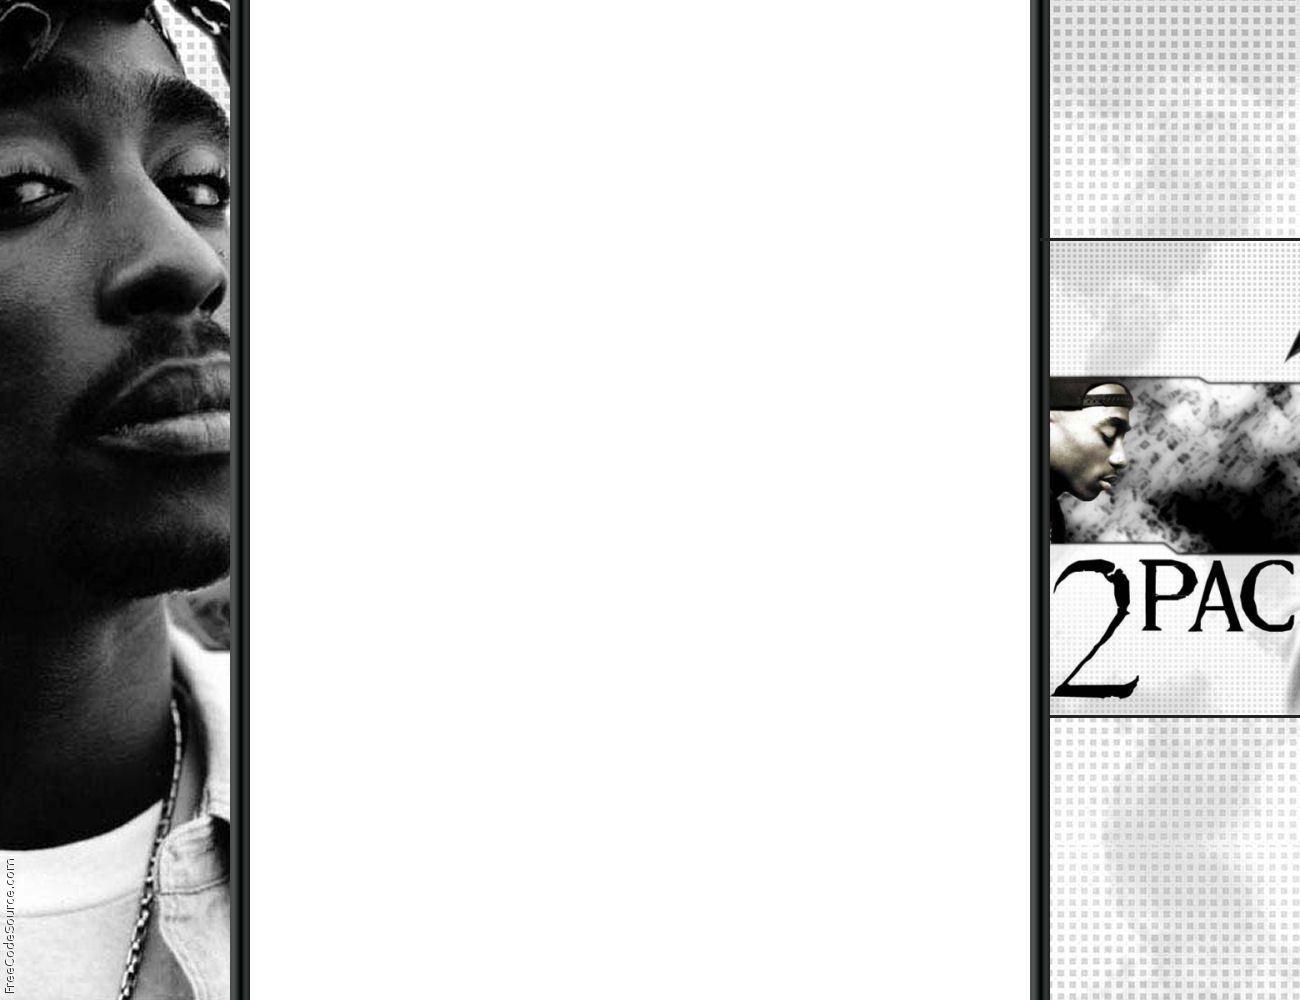 2Pac Formspring Background, 2Pac Formspring Layouts, 2Pac